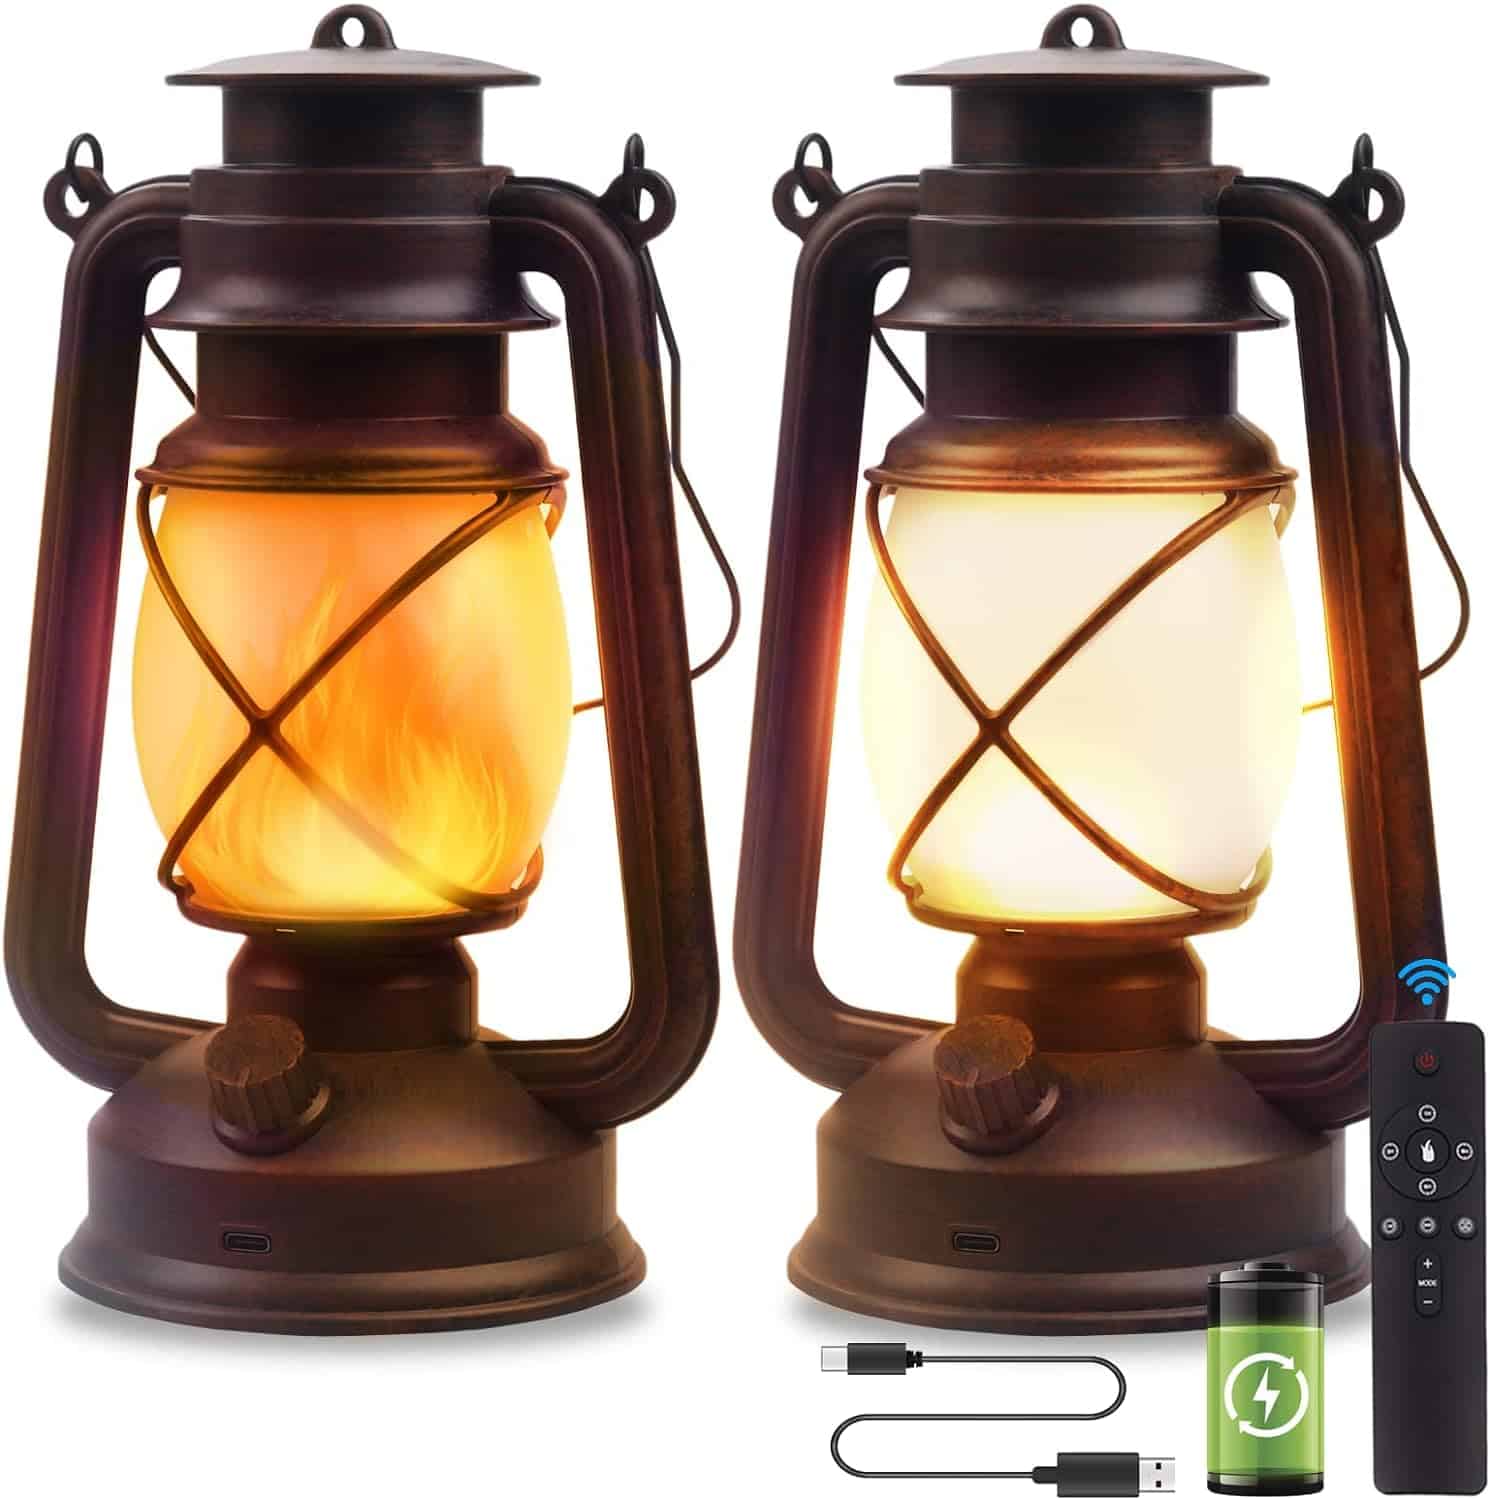 Vintage Lantern LED Battery Powered Camping Lamp Outdoor Hanging Lantern Flickering Flame Rechargeable Retro Lanterns Remote Control 4 Modes Light Non-Solar 2 Pack